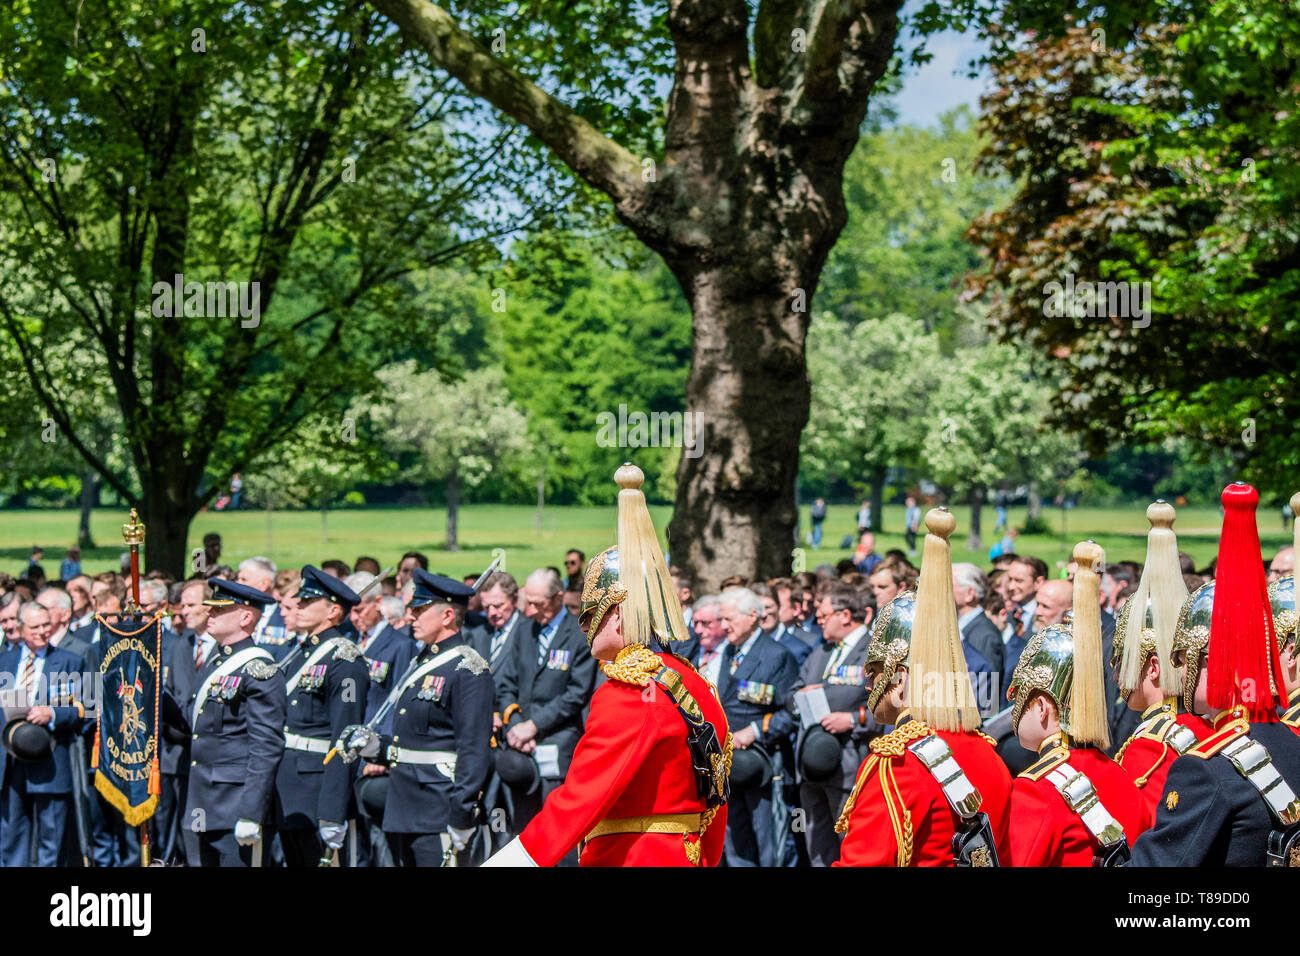 London, UK. 12th May, 2019. The service at the bandstand - His Royal Highness The Prince of Wales, Field Marshal, Colonel in Chief 1ST The Queen’s Dragoon Guards, takes the salute at the Annual Parade and Service of The Combined Cavalry Old Comrades Association at the Cavalry Memorial adjacent to the Bandstand in Hyde Park. It is 95 years on from the unveiling and dedication of its memorial in Hyde Park. Credit: Guy Bell/Alamy Live News Stock Photo